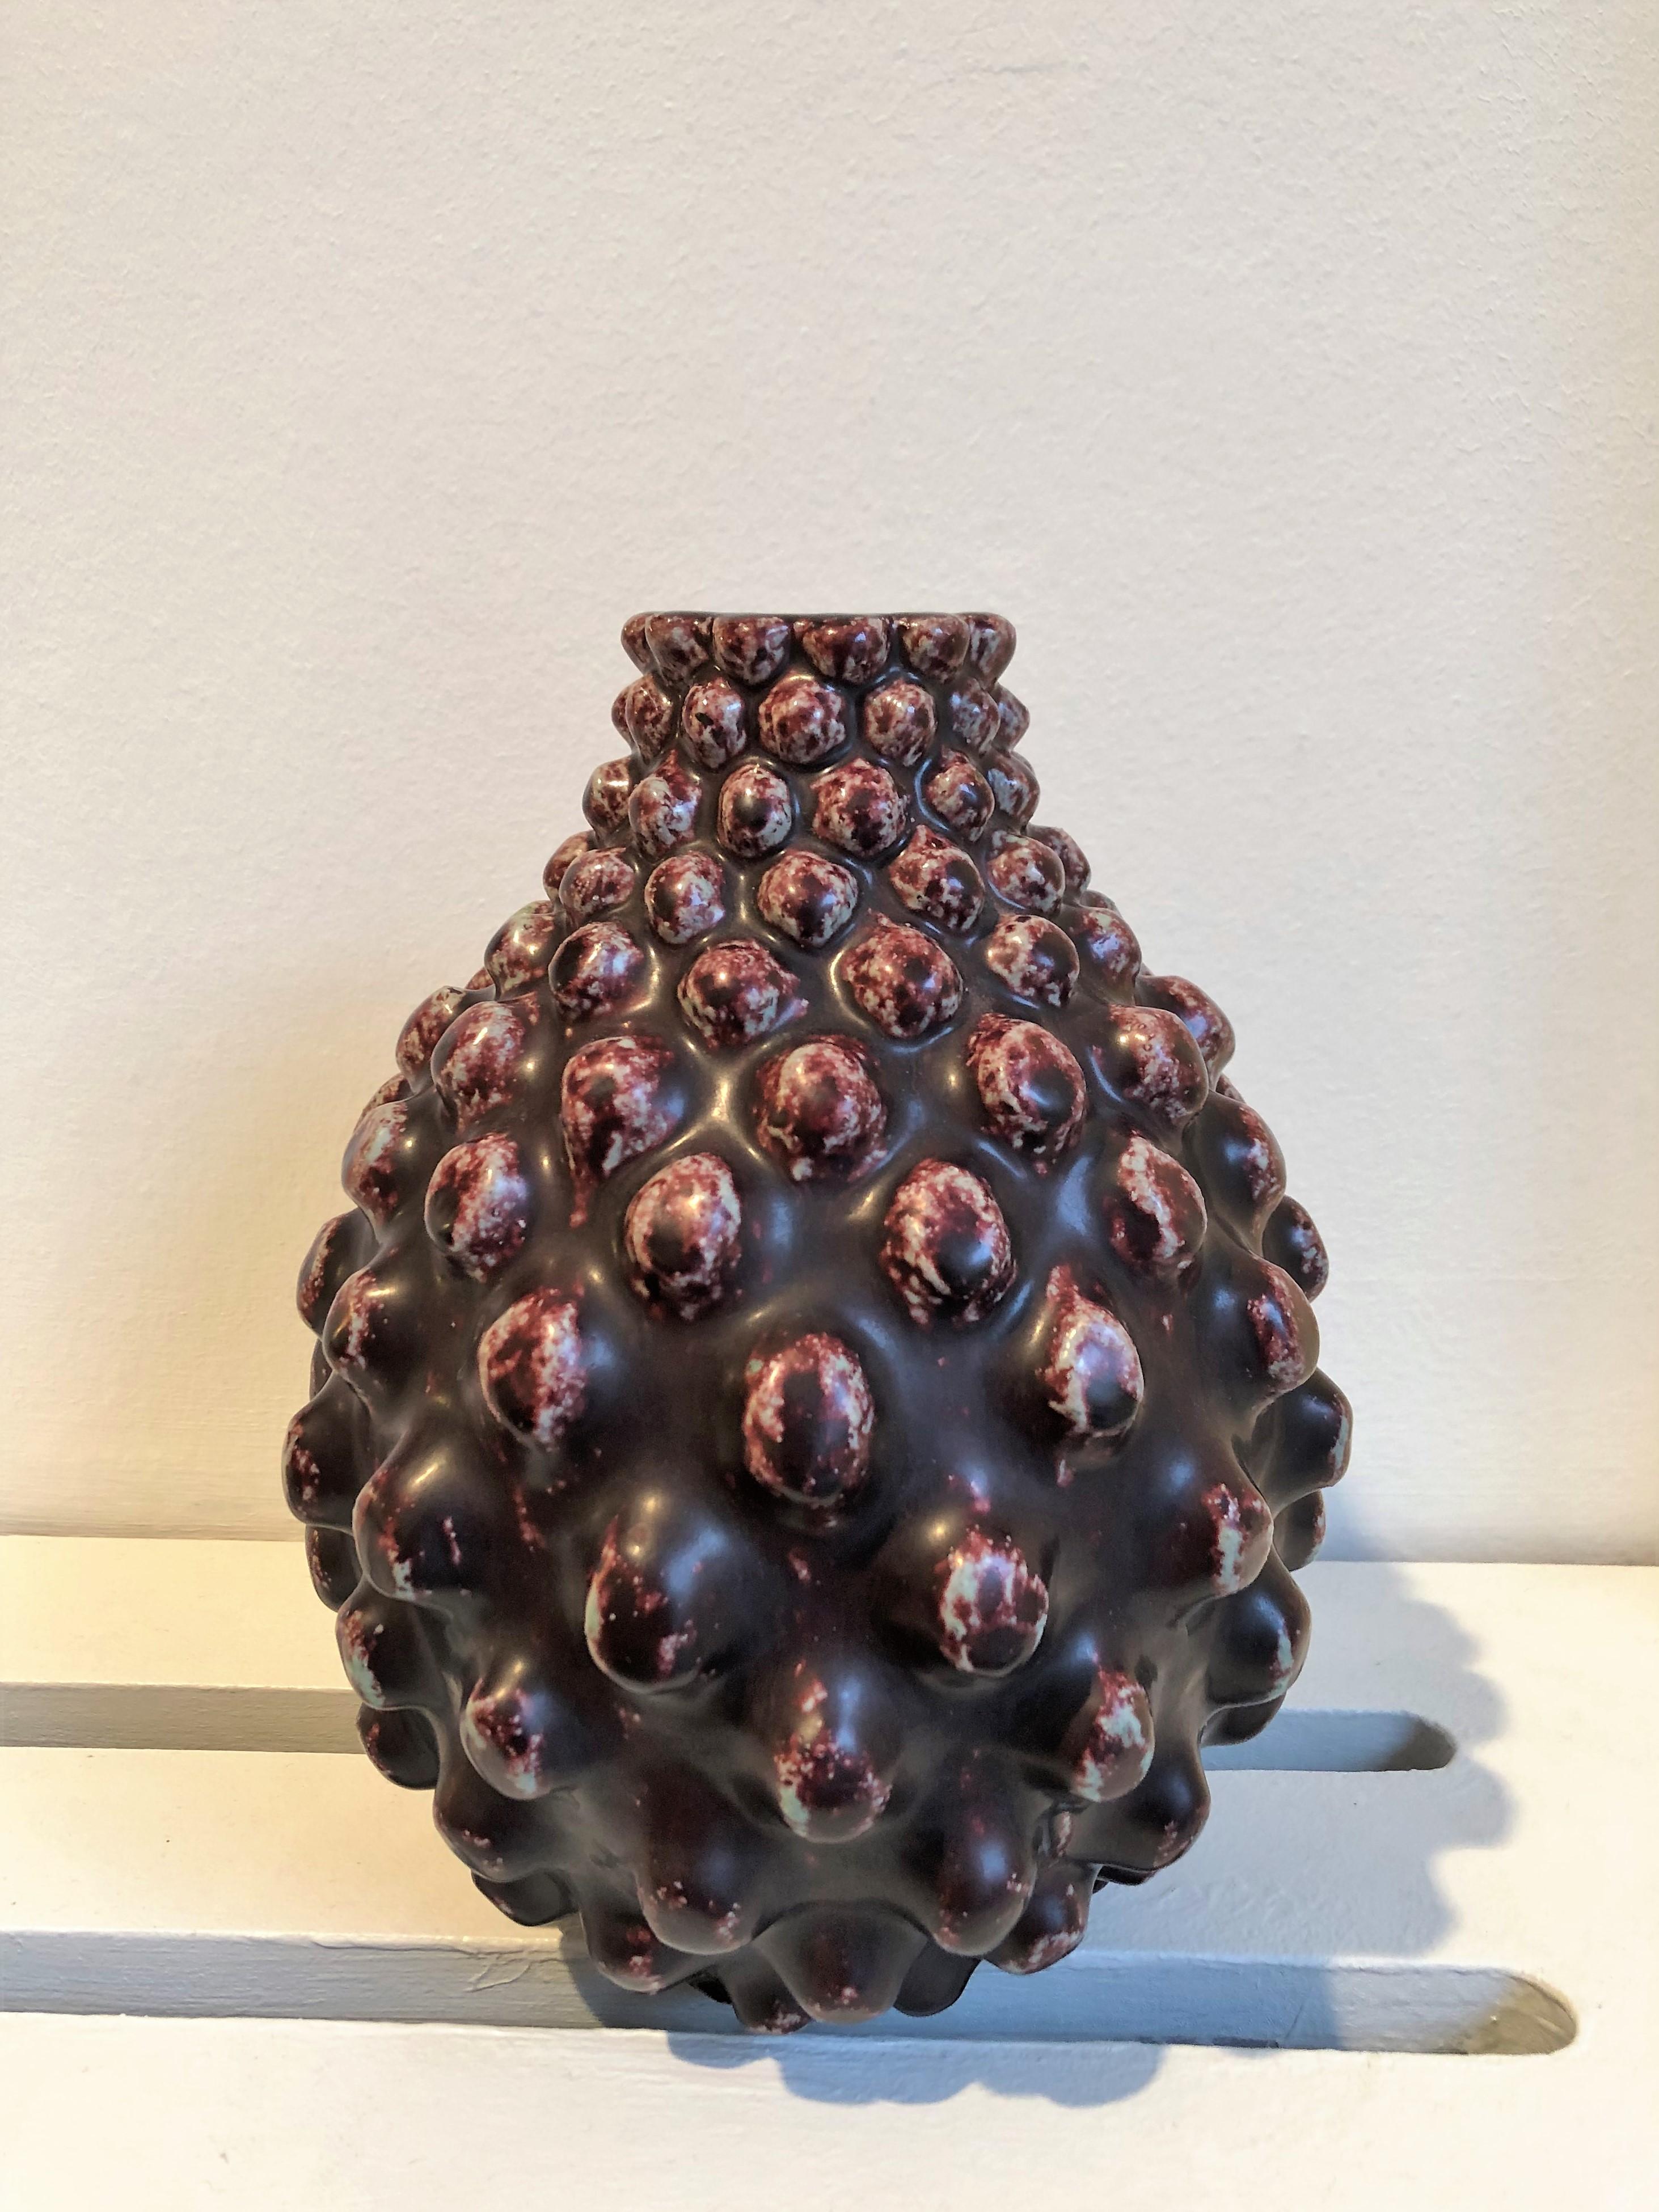 Axel Salto, stoneware vase in 'budding' style, decorated with oxblood glaze. Signed 'Salto, 21329. Royal Copenhagen'. Designed, 1950s. This example made 1961.

Literature:
Axel Salto, Master of Stoneware, Clay, Museum of Ceramic Art Denmark,